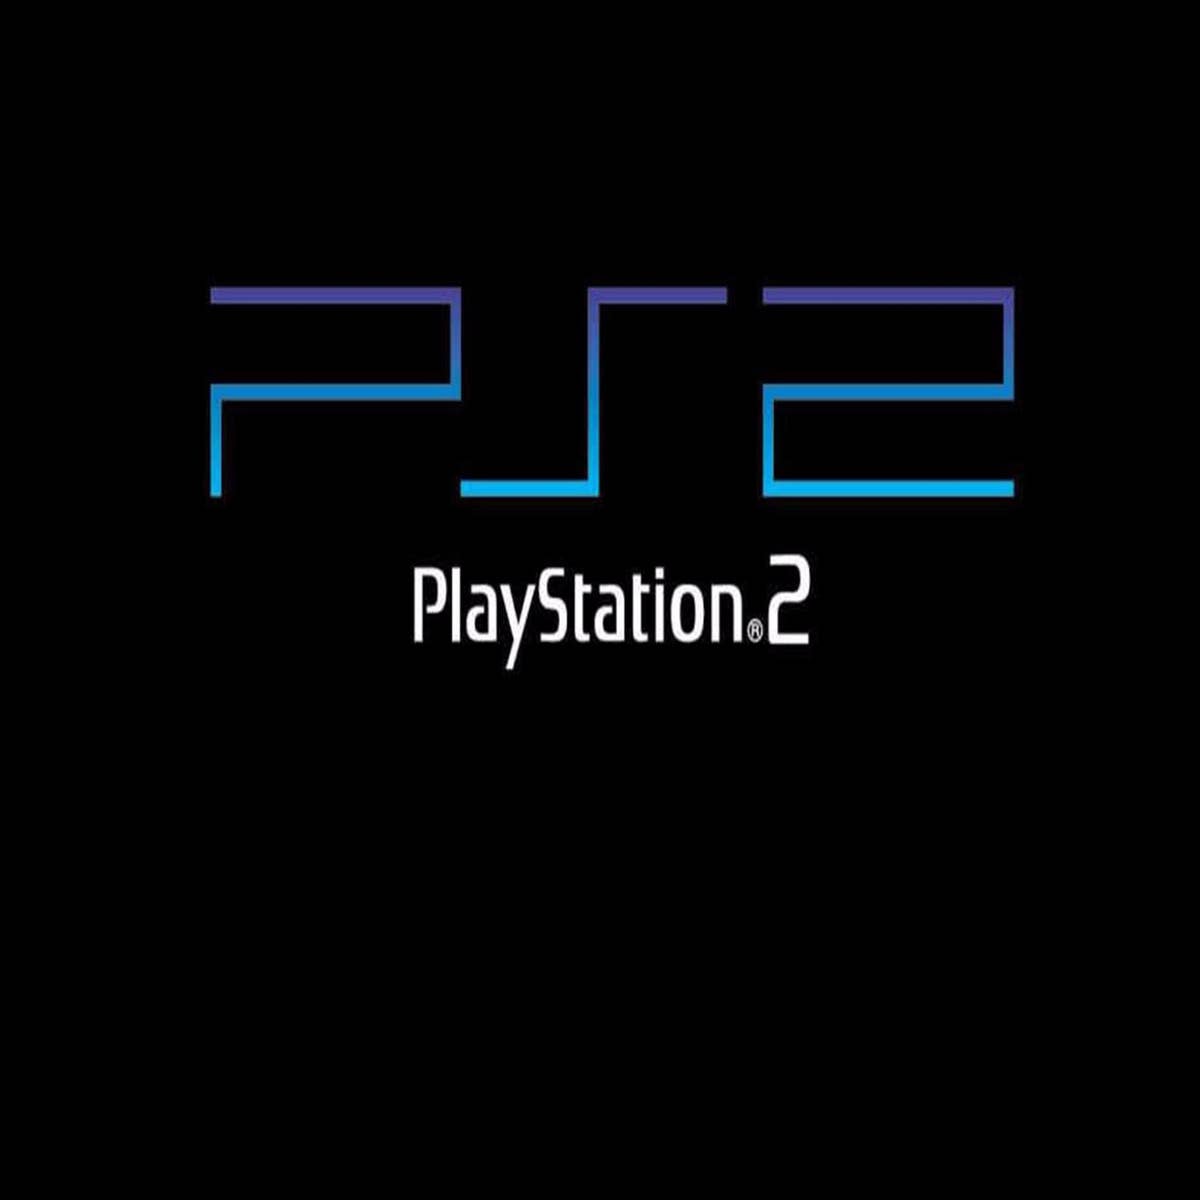 do i need to modify my PS2 to play this? : r/playstation